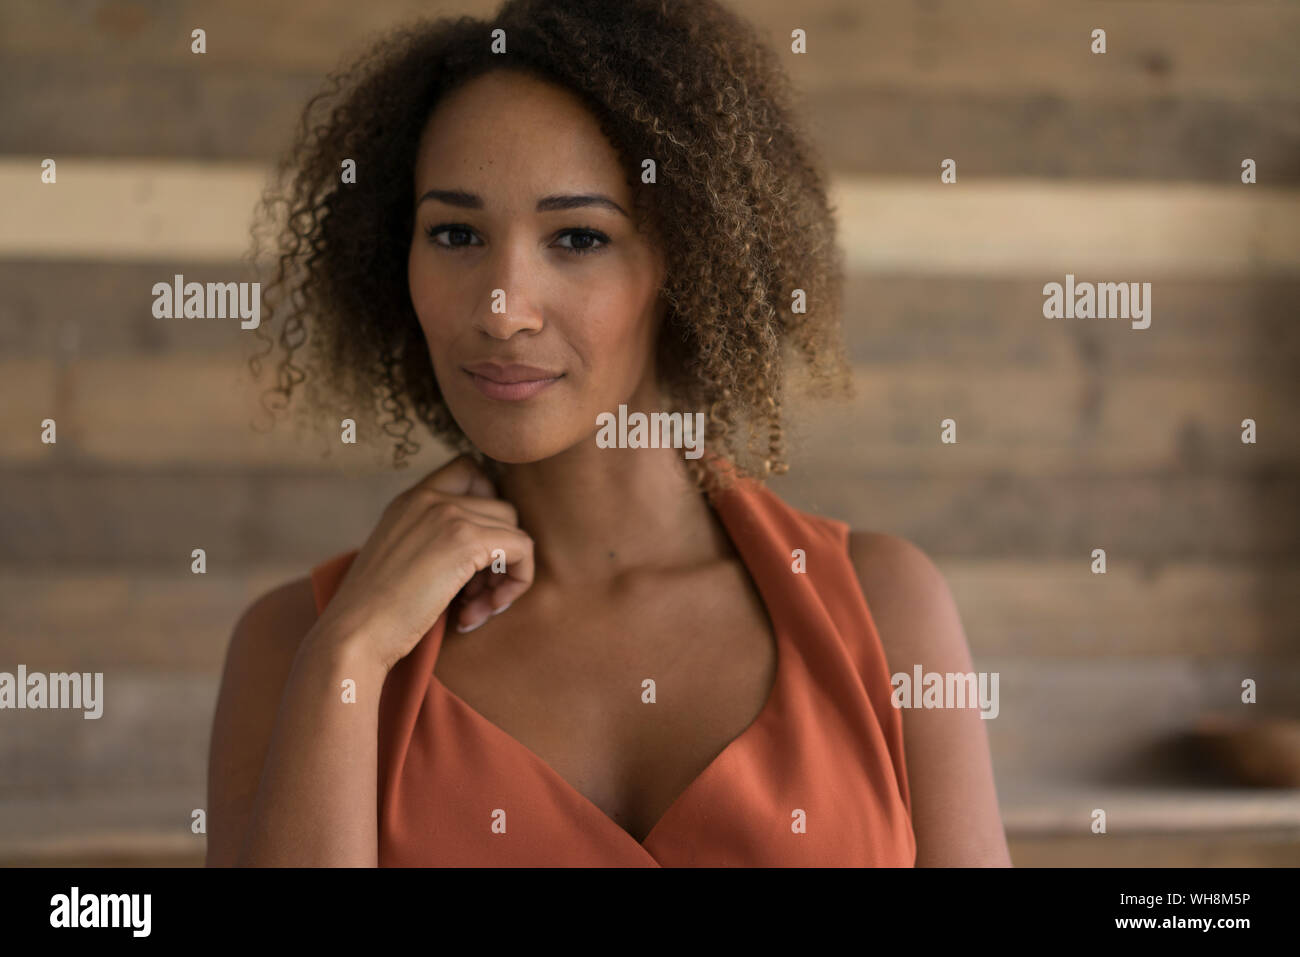 Portrait of young woman with ringlets Stock Photo